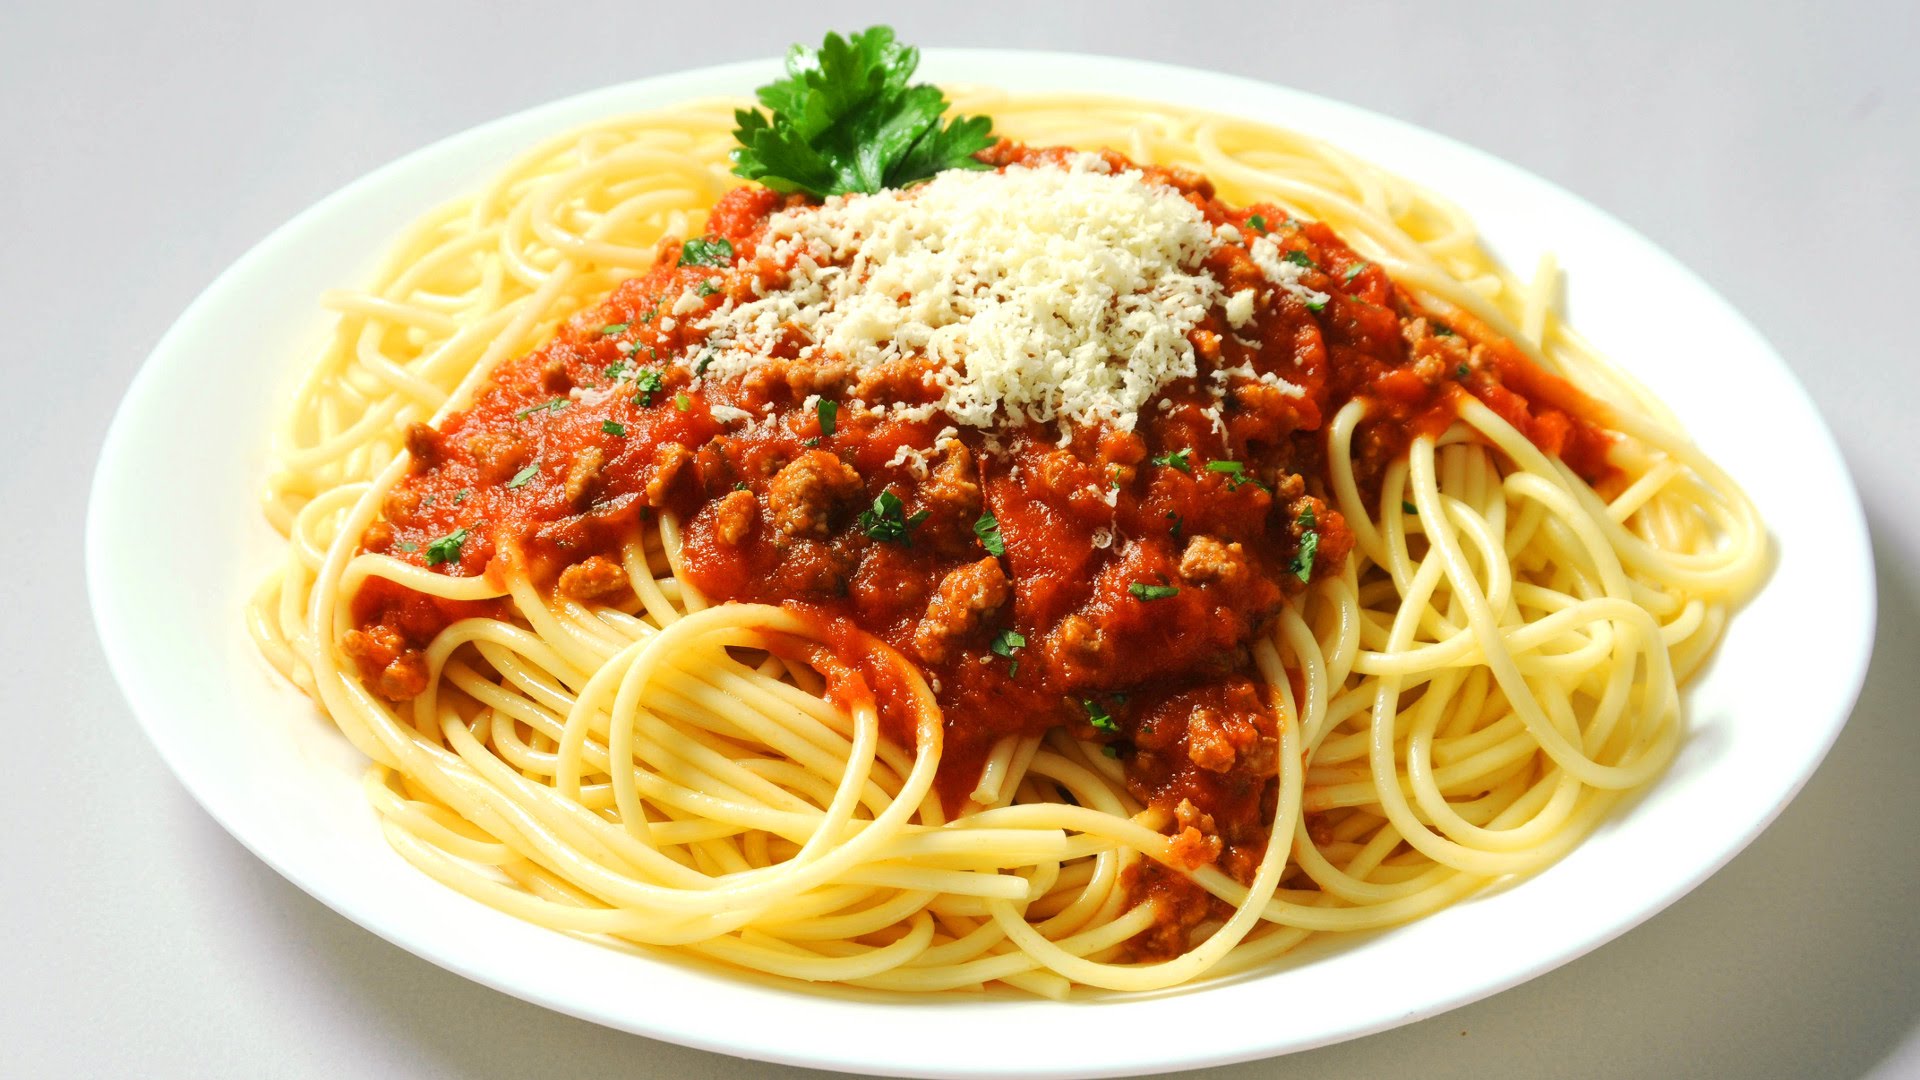 What I Learned This Week: When The Father Sat Down And Ate Spaghetti ...